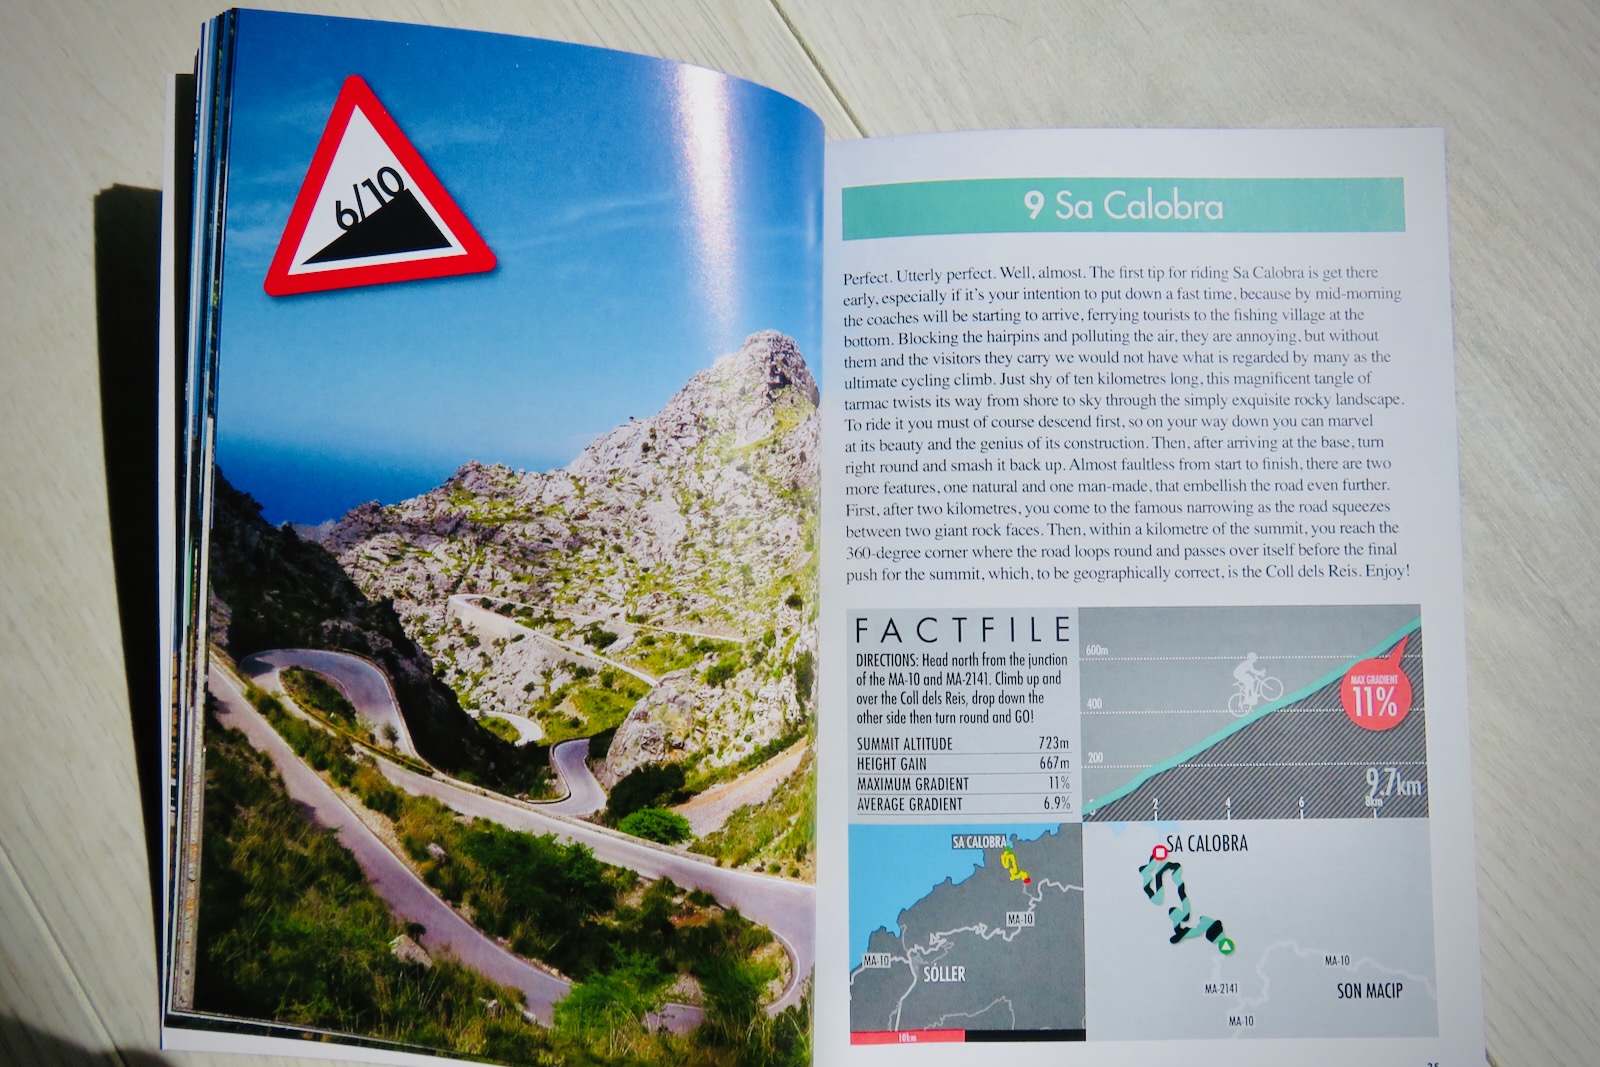 100 Greatest Cycling Climbs of Spain by Simon Warren